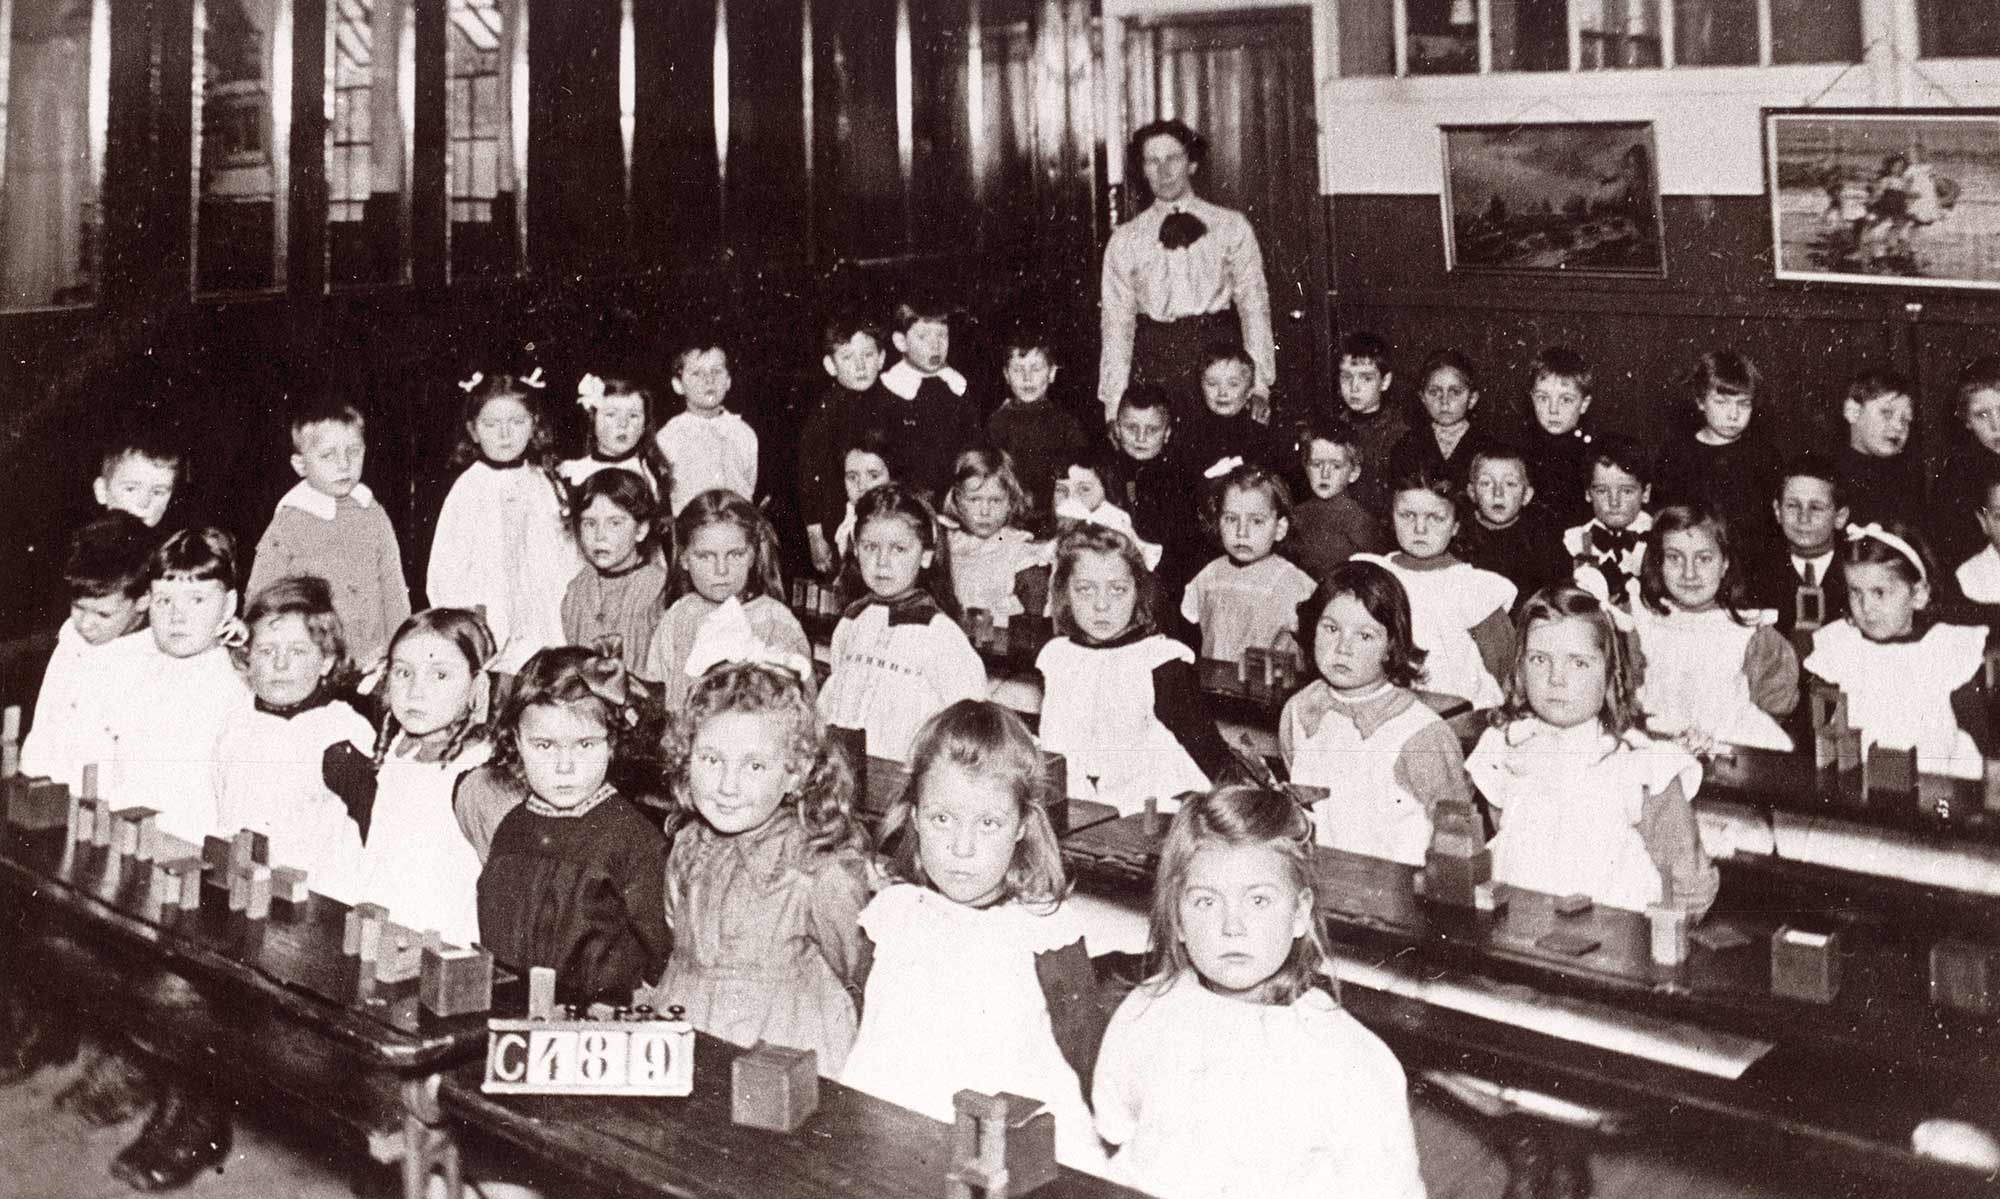 Schoolchildren at St. Mark’s School c.1915 - Leicester and Leicestershire Record Office